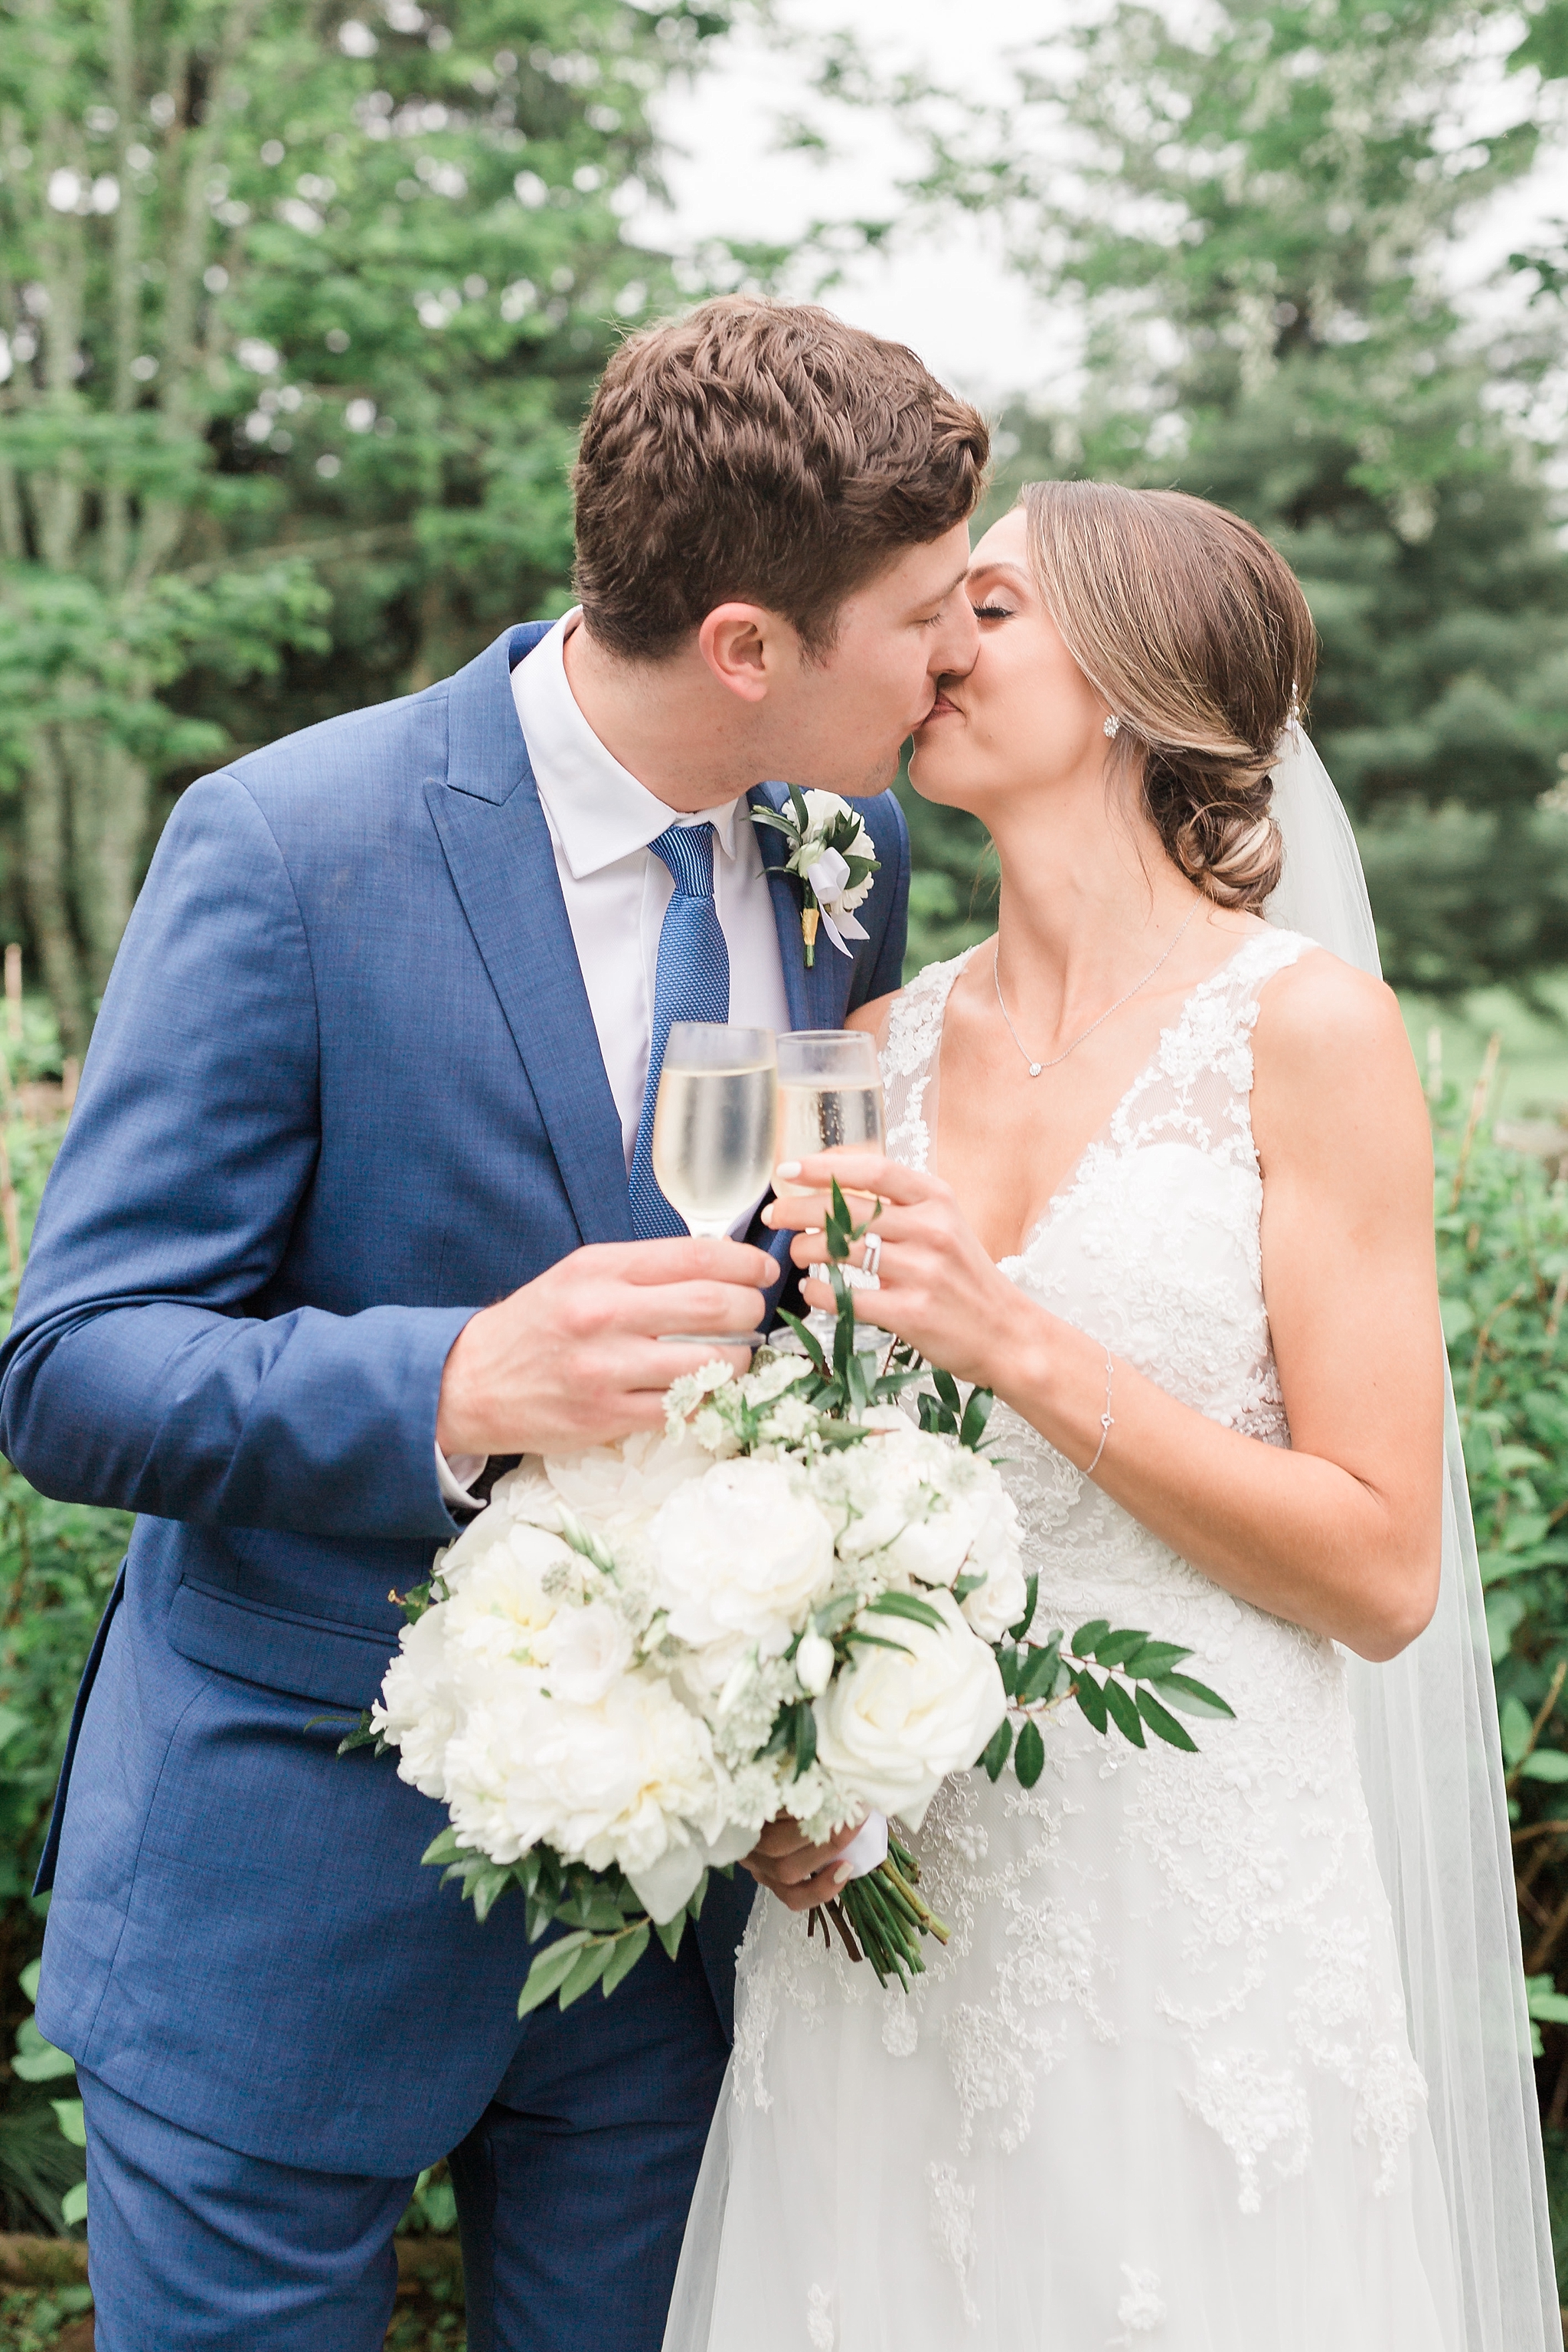 This romantic garden wedding was photographed at Airlie Center in Warrenton, VA by fine art Washington, DC photographer, Alicia Lacey. 